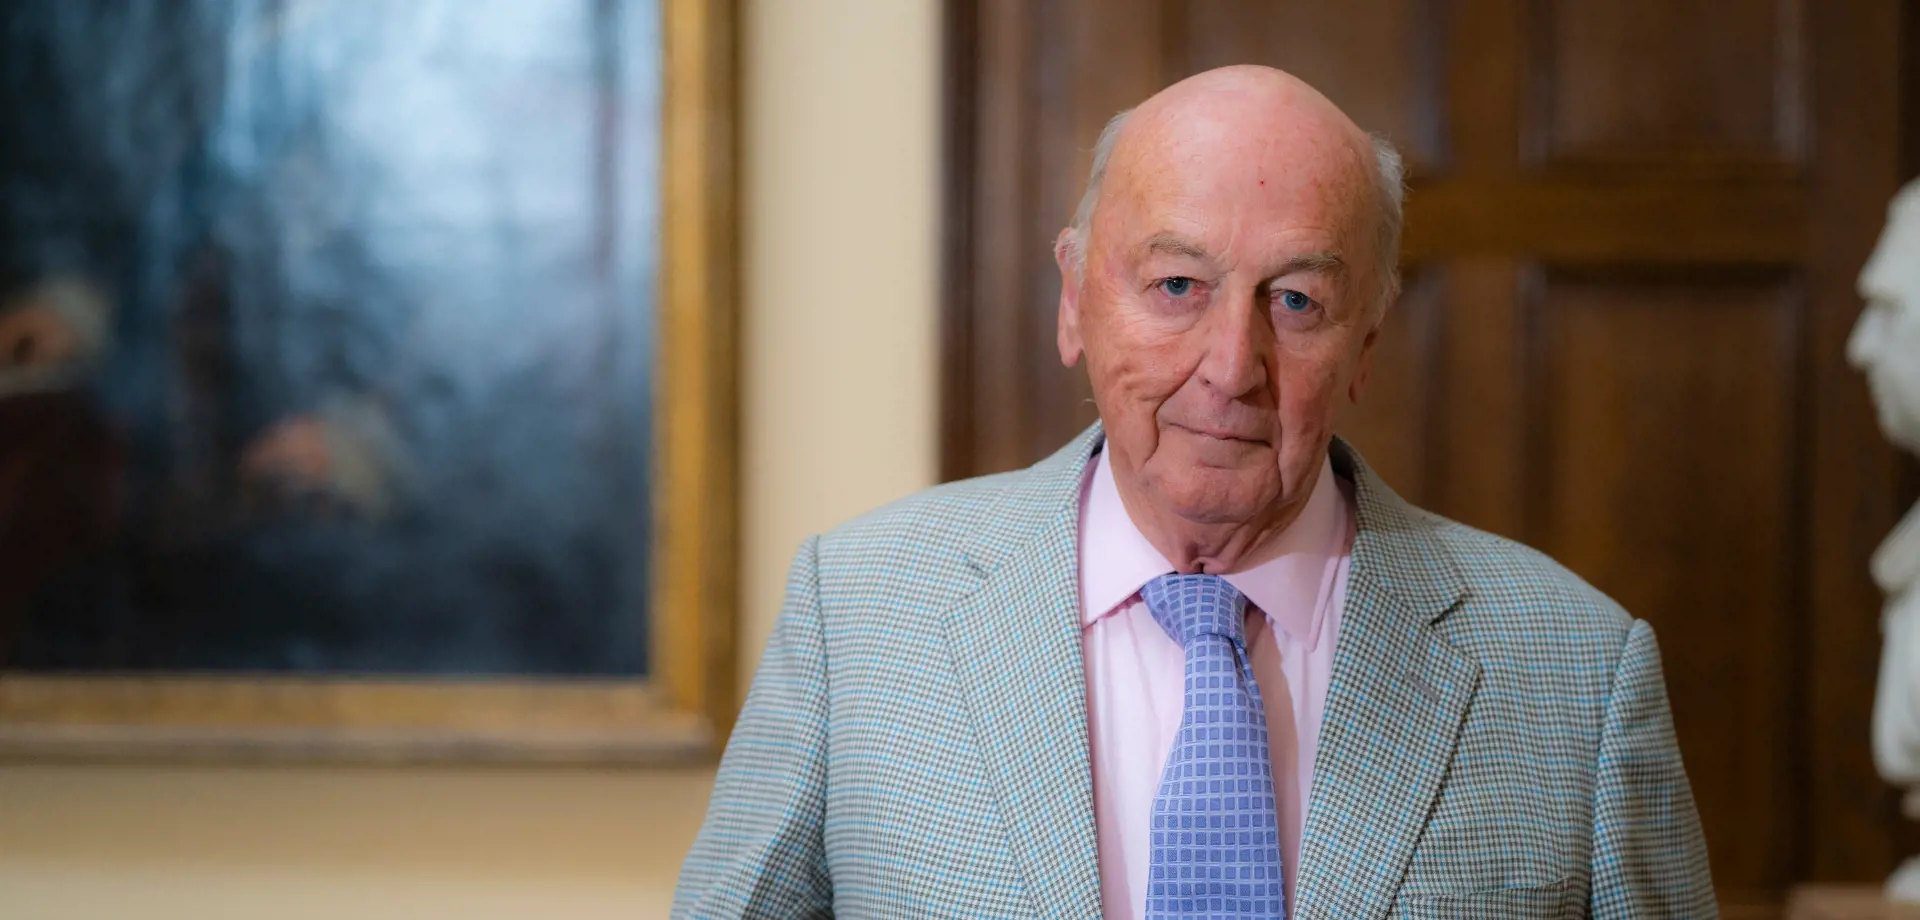 Conversations with the Duke of Devonshire